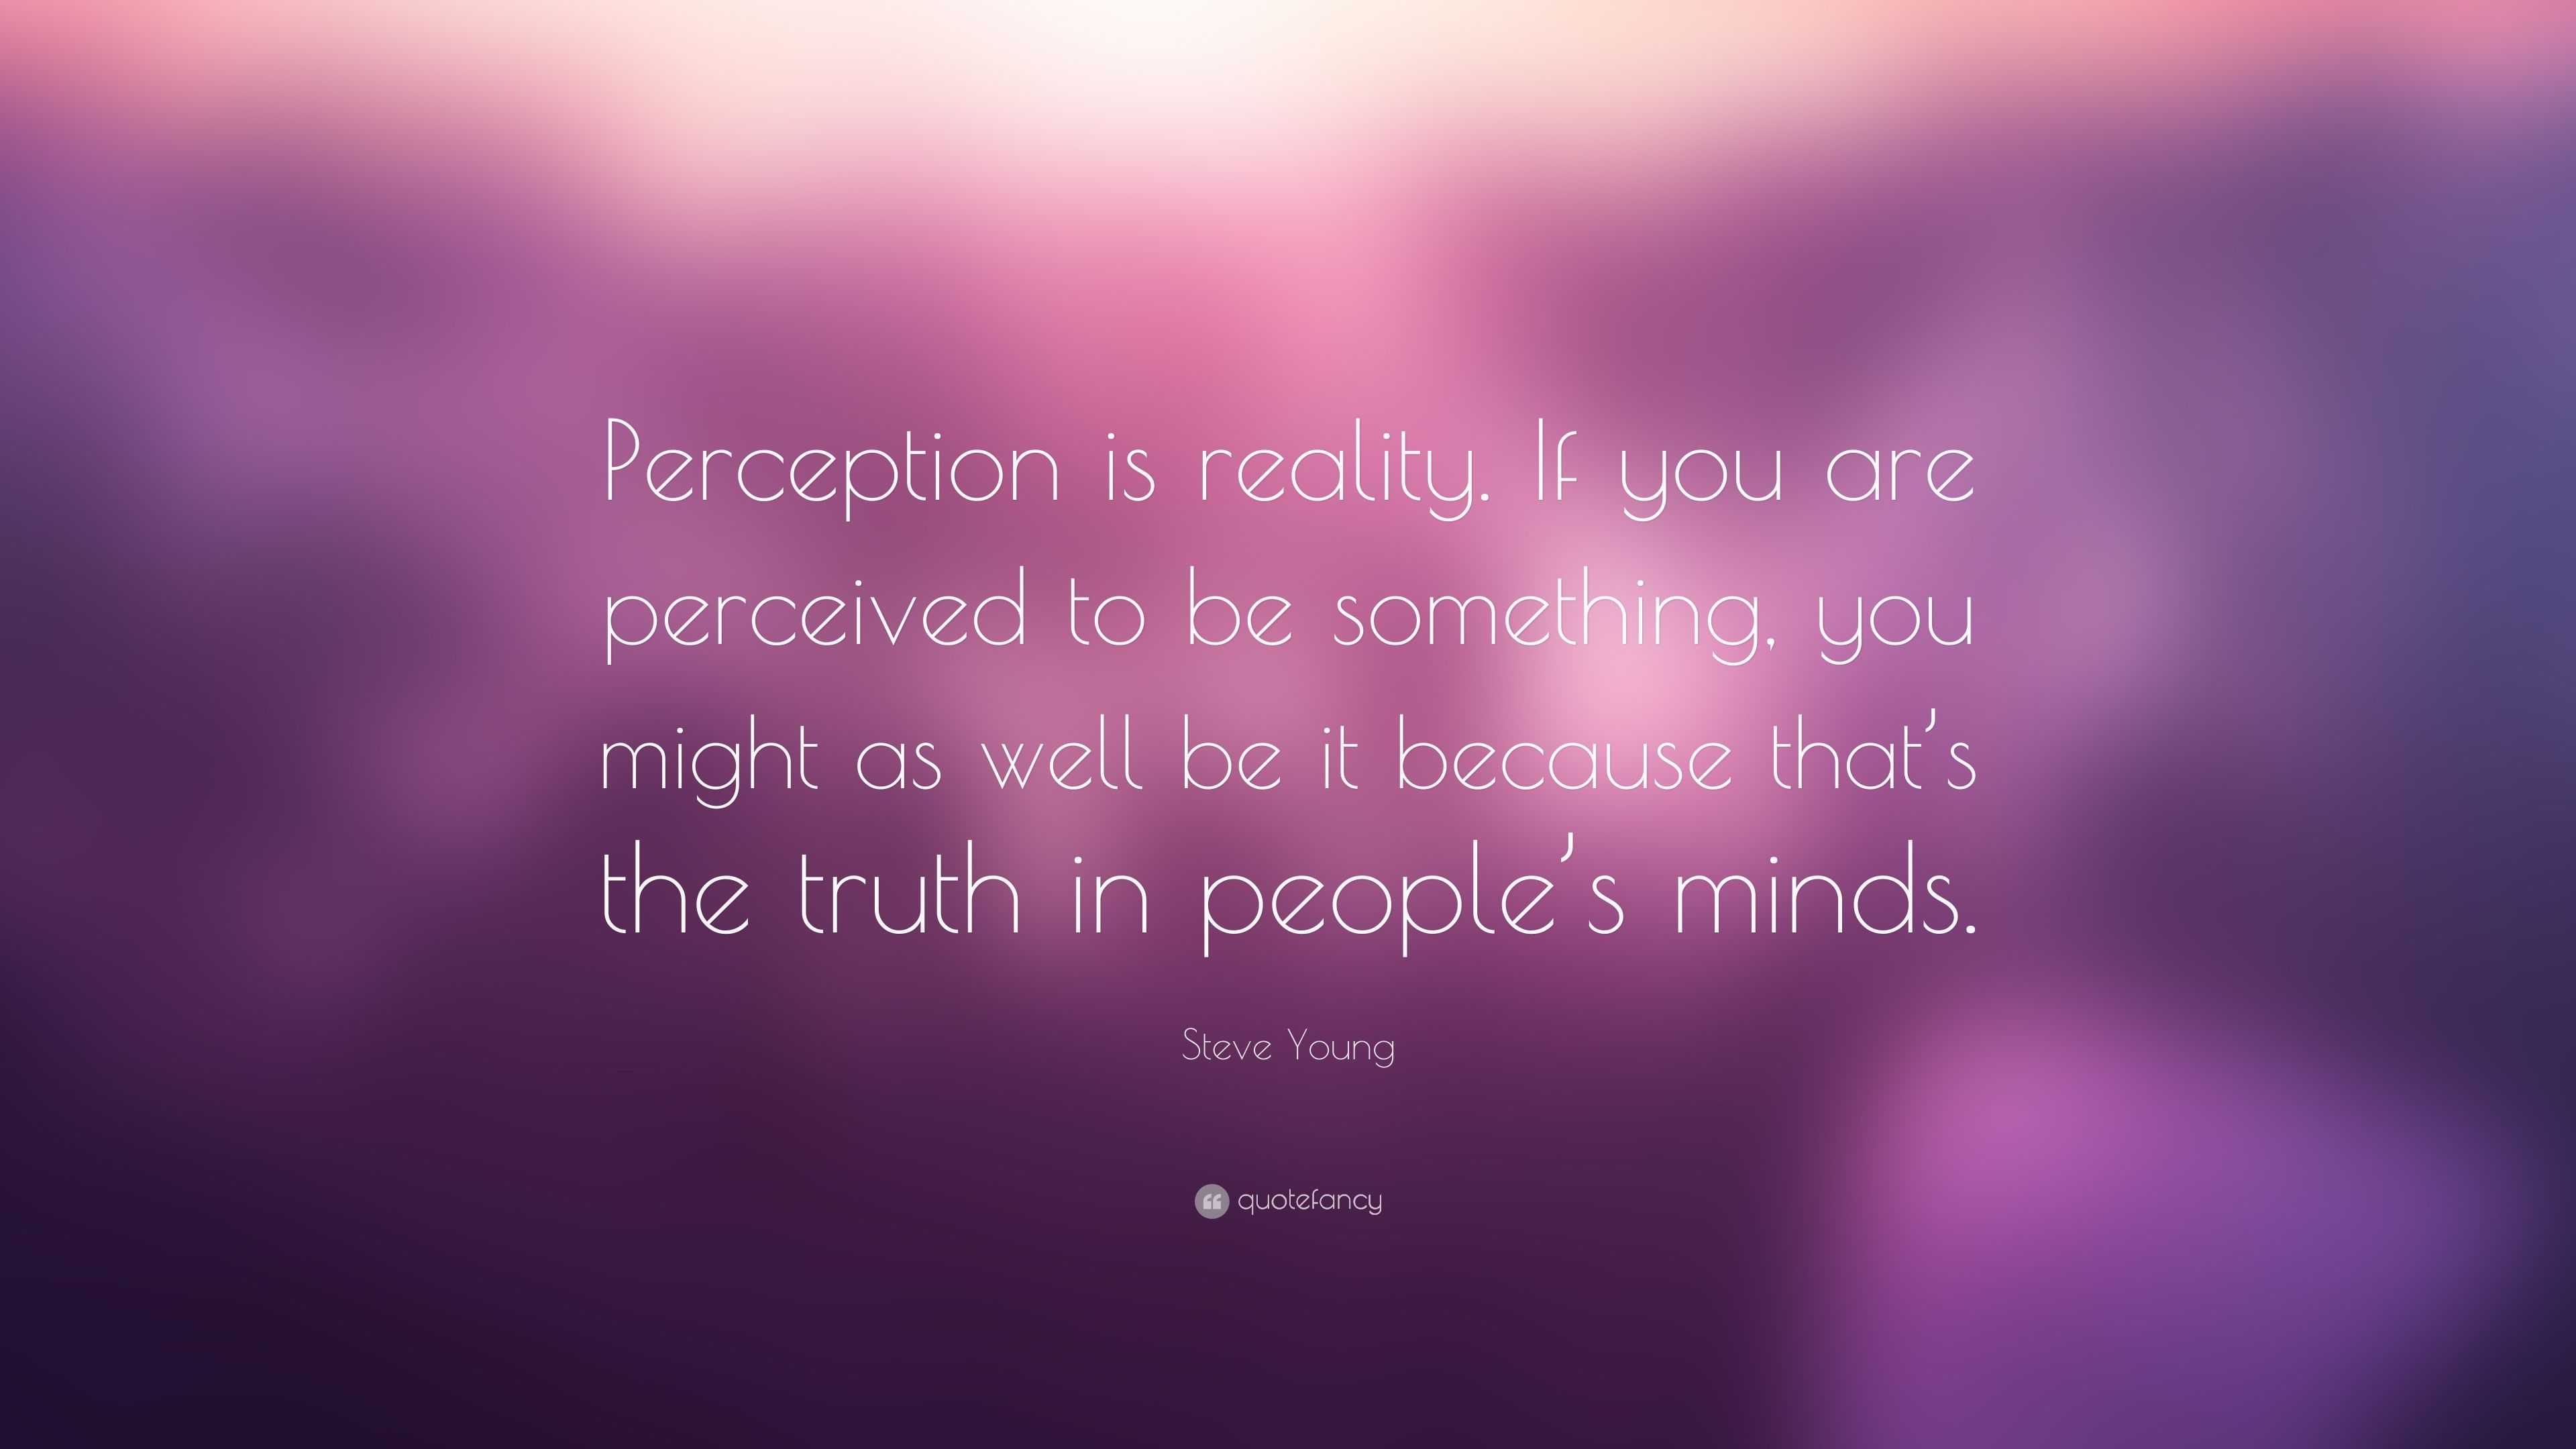 Steve Young Quote “Perception is reality. If you are